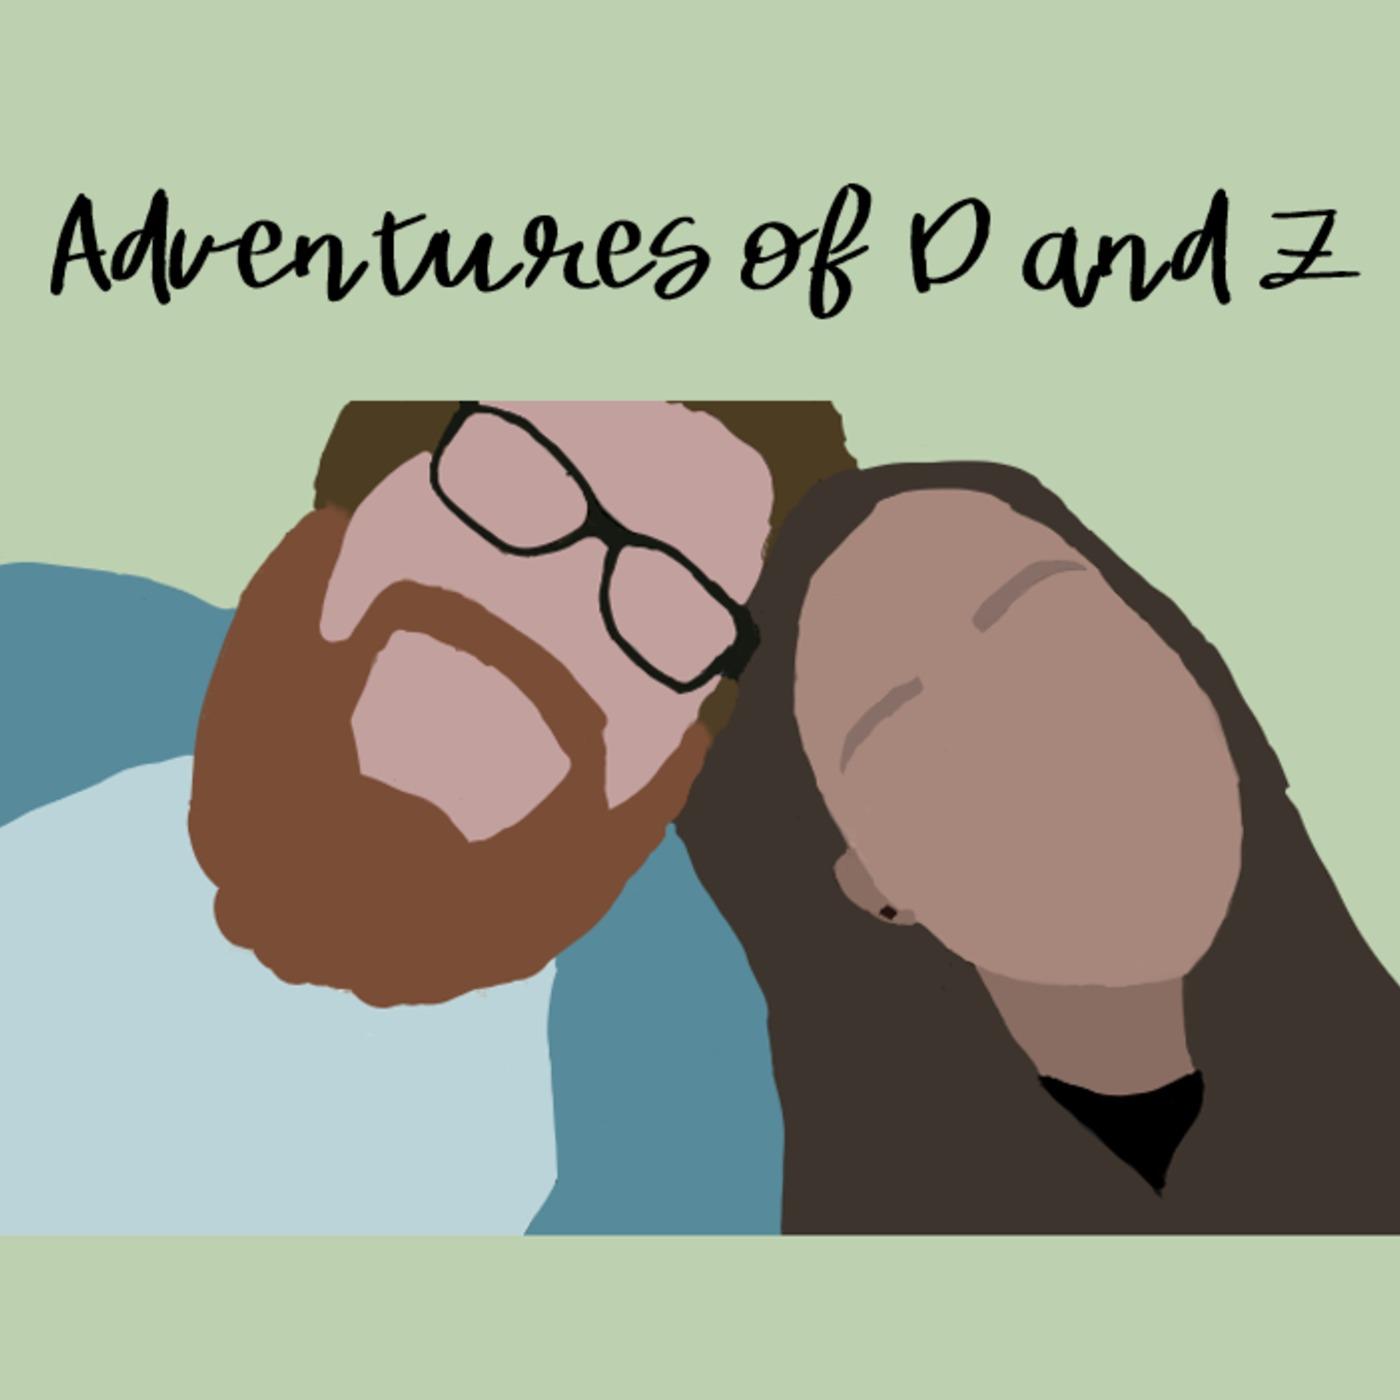 Adventures of D and Z